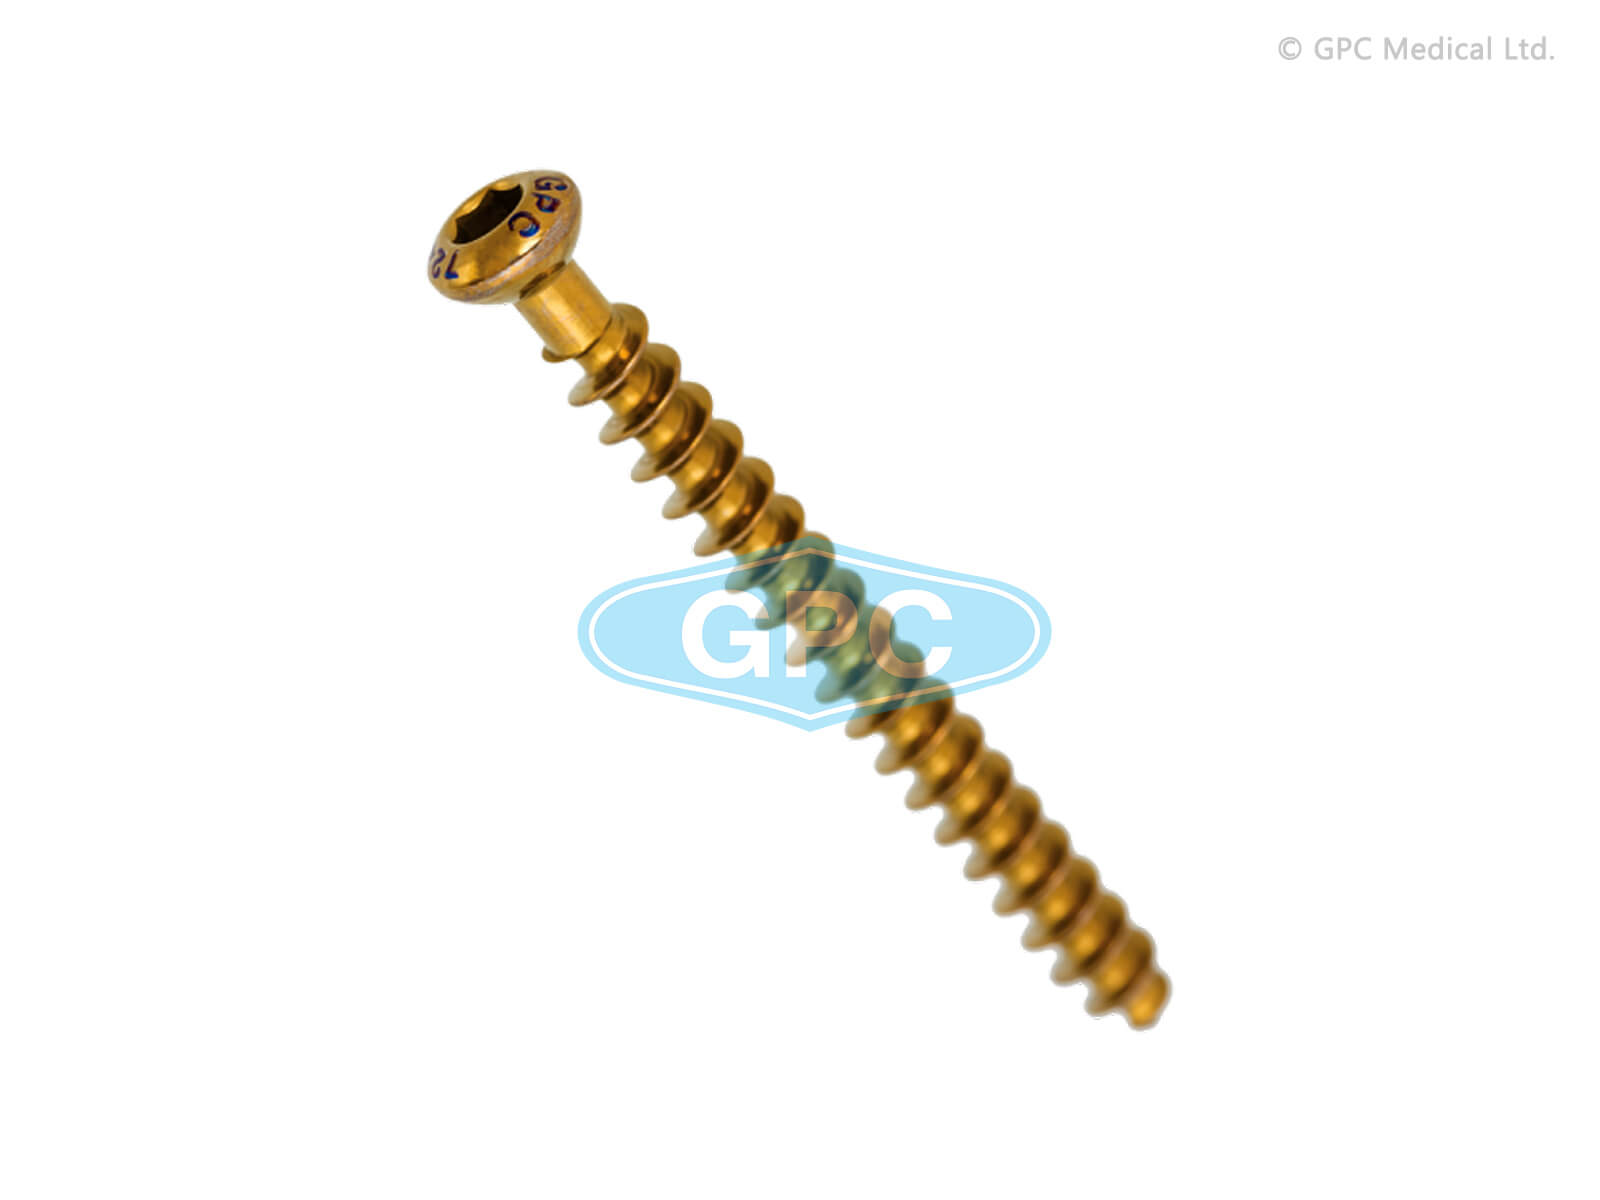 Cancellous Screw 3.5mm, Fully Threaded